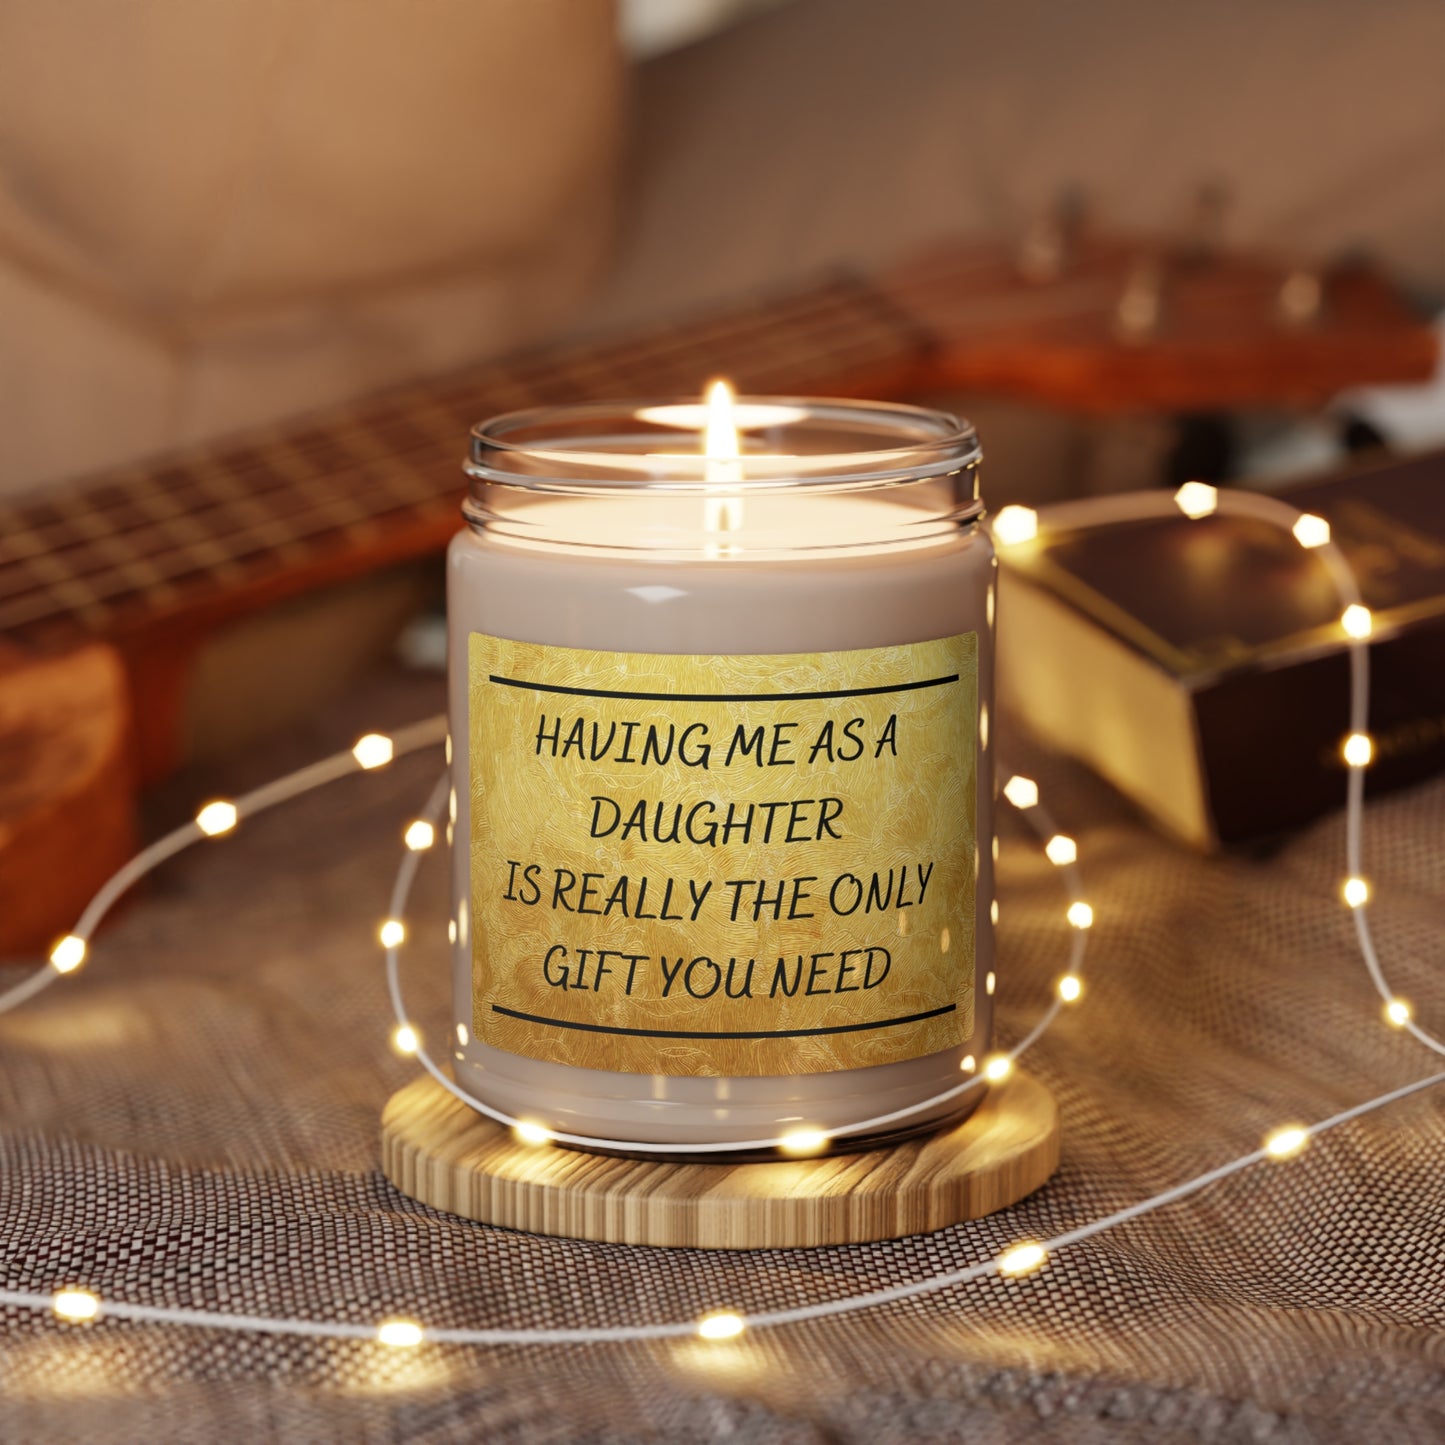 Scented Soy Candle, 9oz Having me as a daughter is the only gift you need.